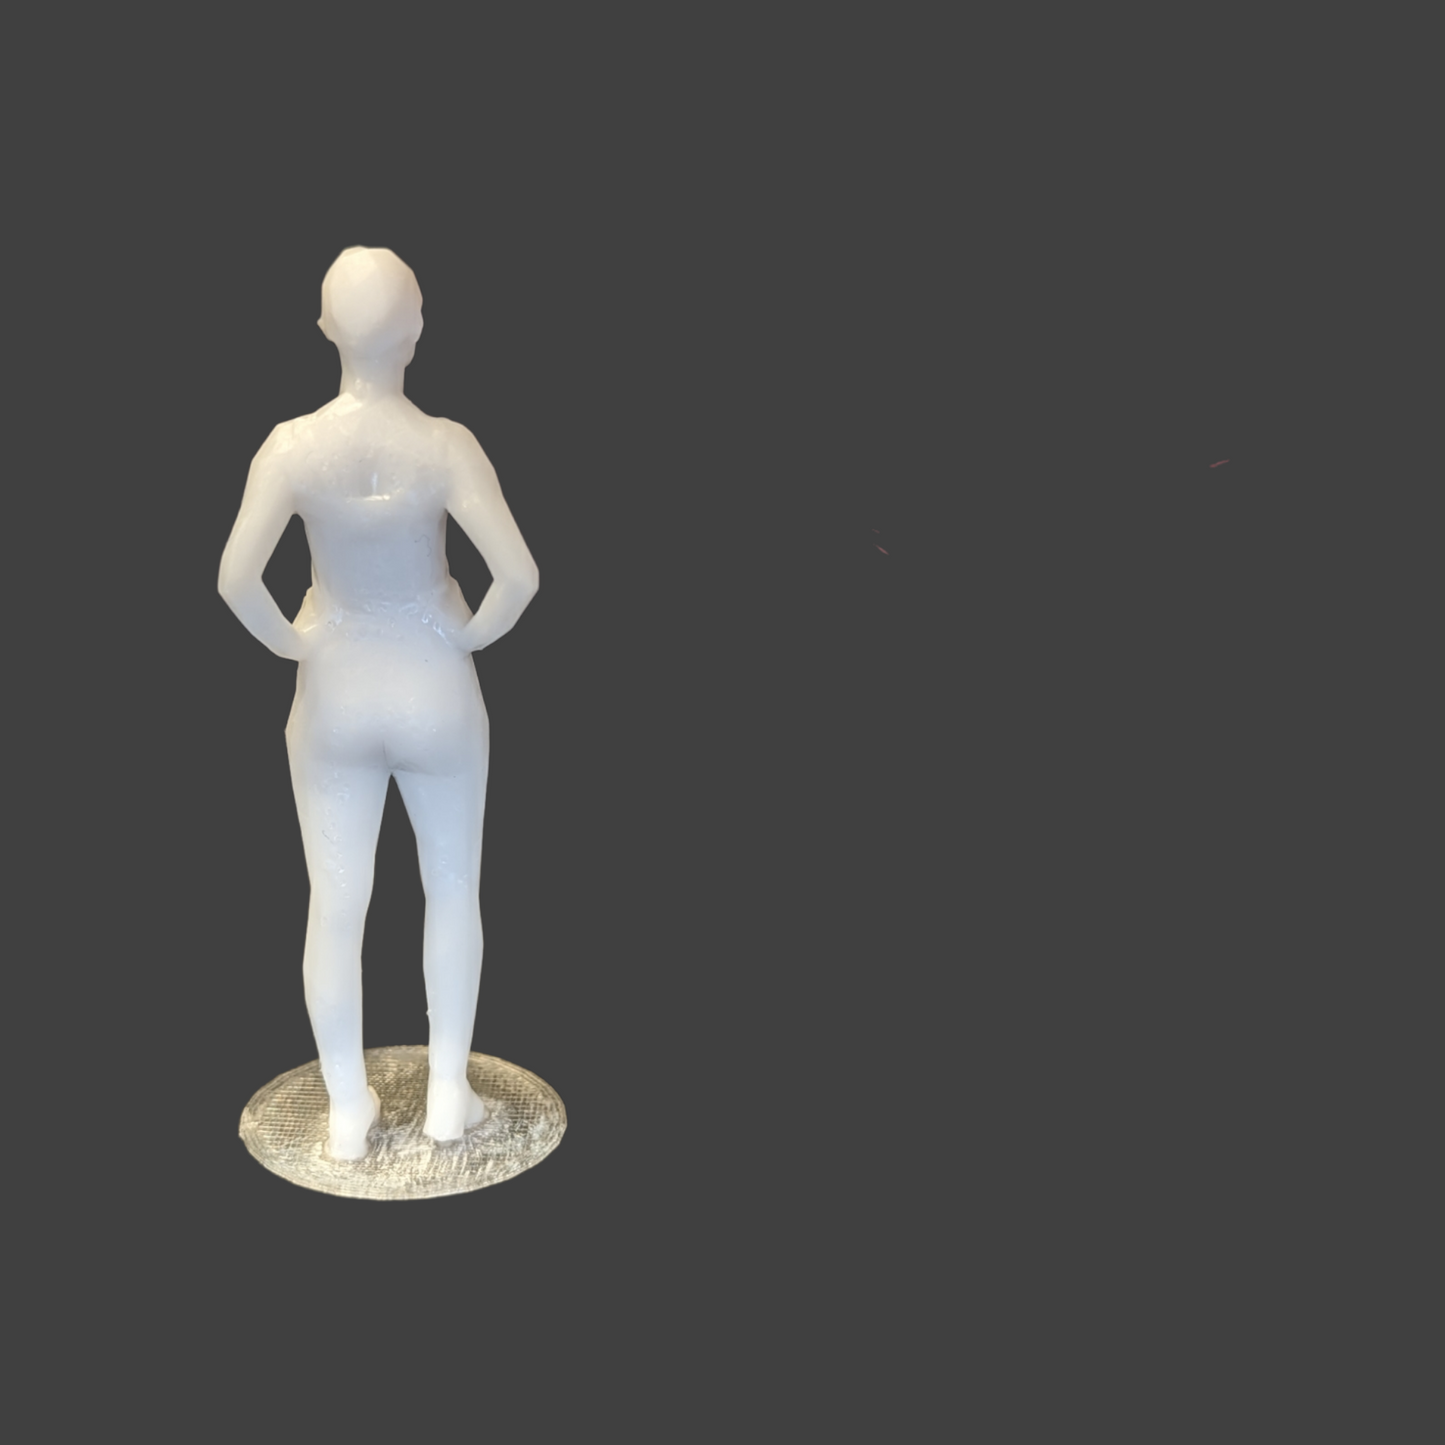 Scale Model Box Unpainted Figure of Woman Standing in Sports Clothing Stretching